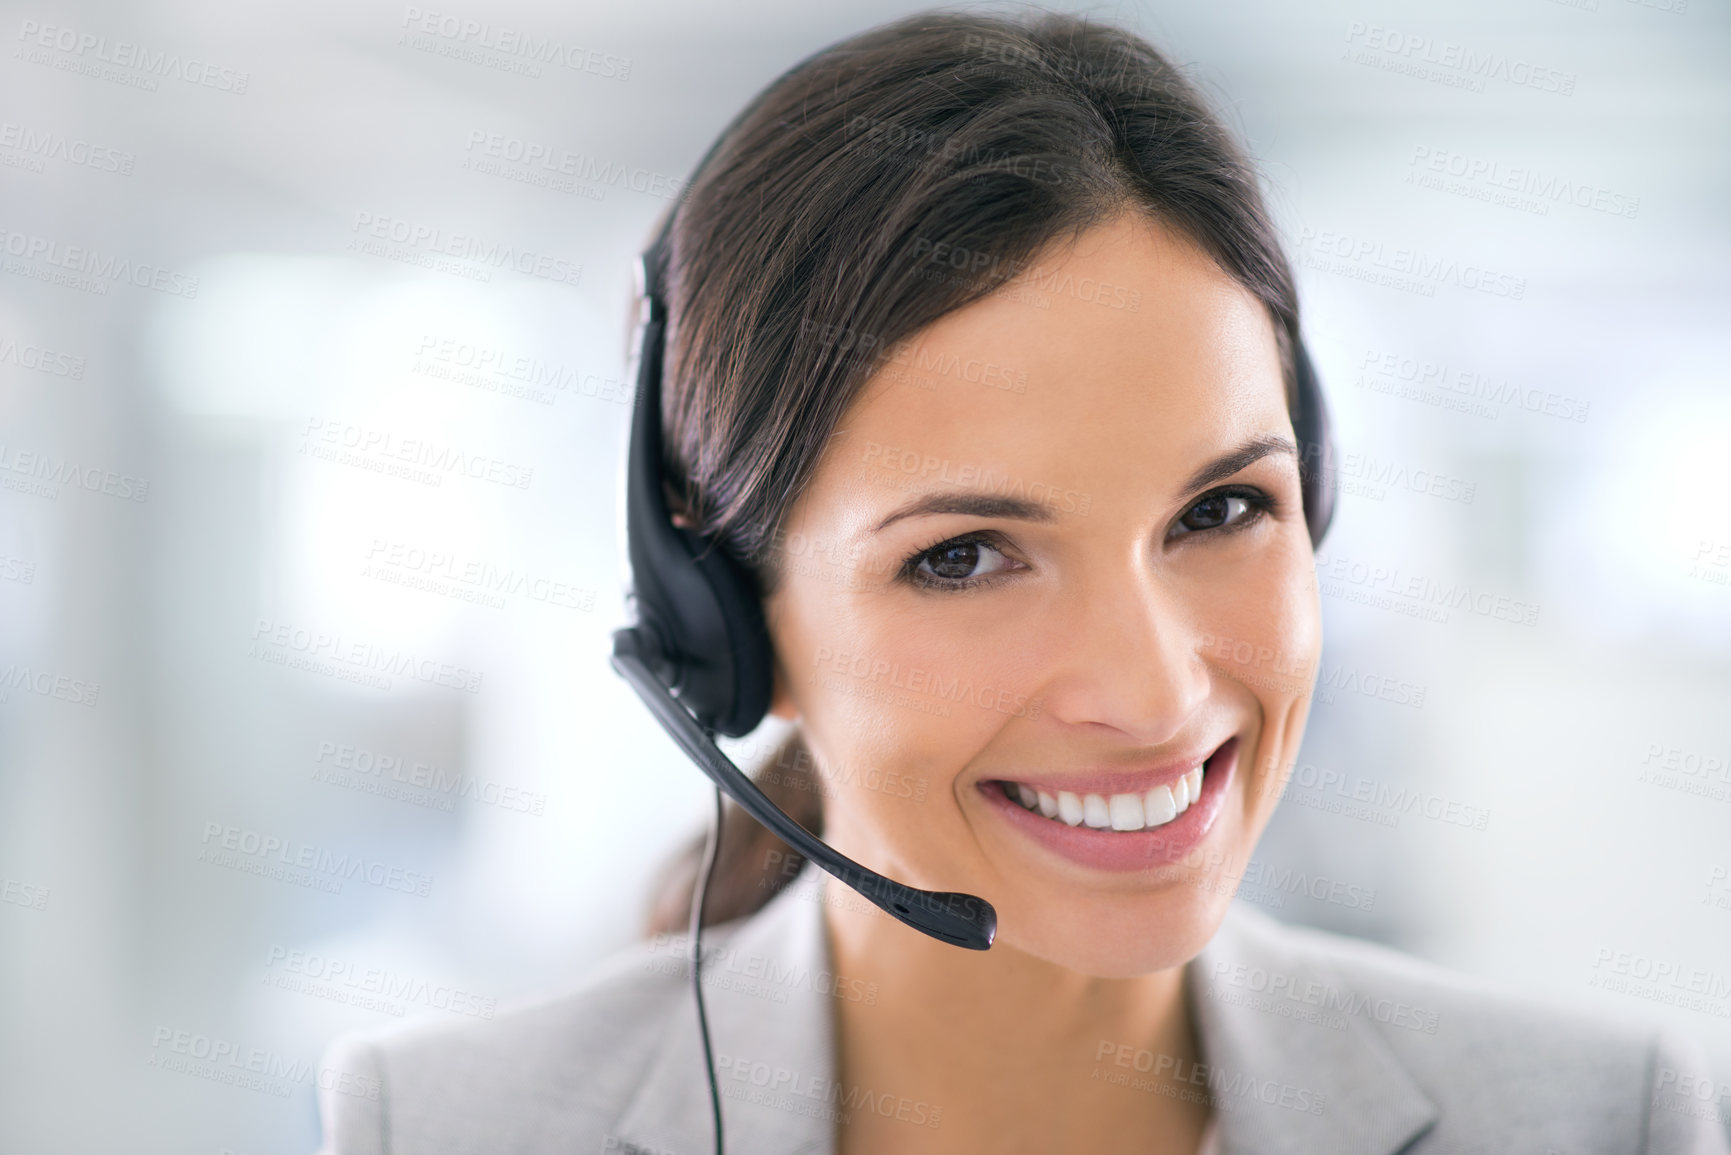 Buy stock photo Shot of an attractive customer support agent